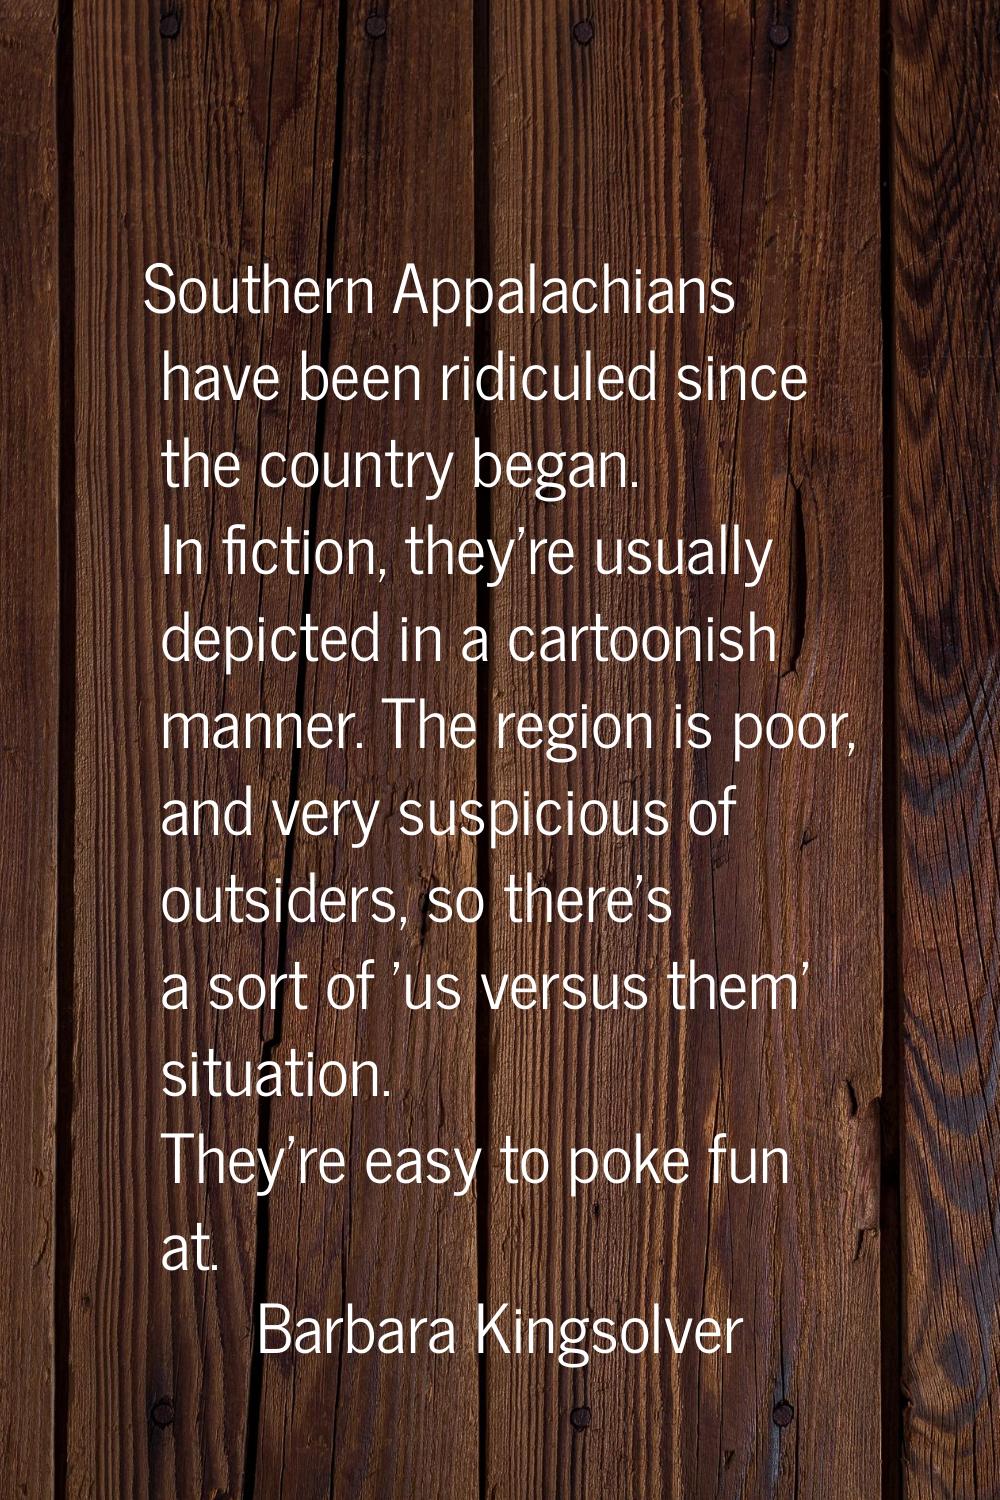 Southern Appalachians have been ridiculed since the country began. In fiction, they're usually depi